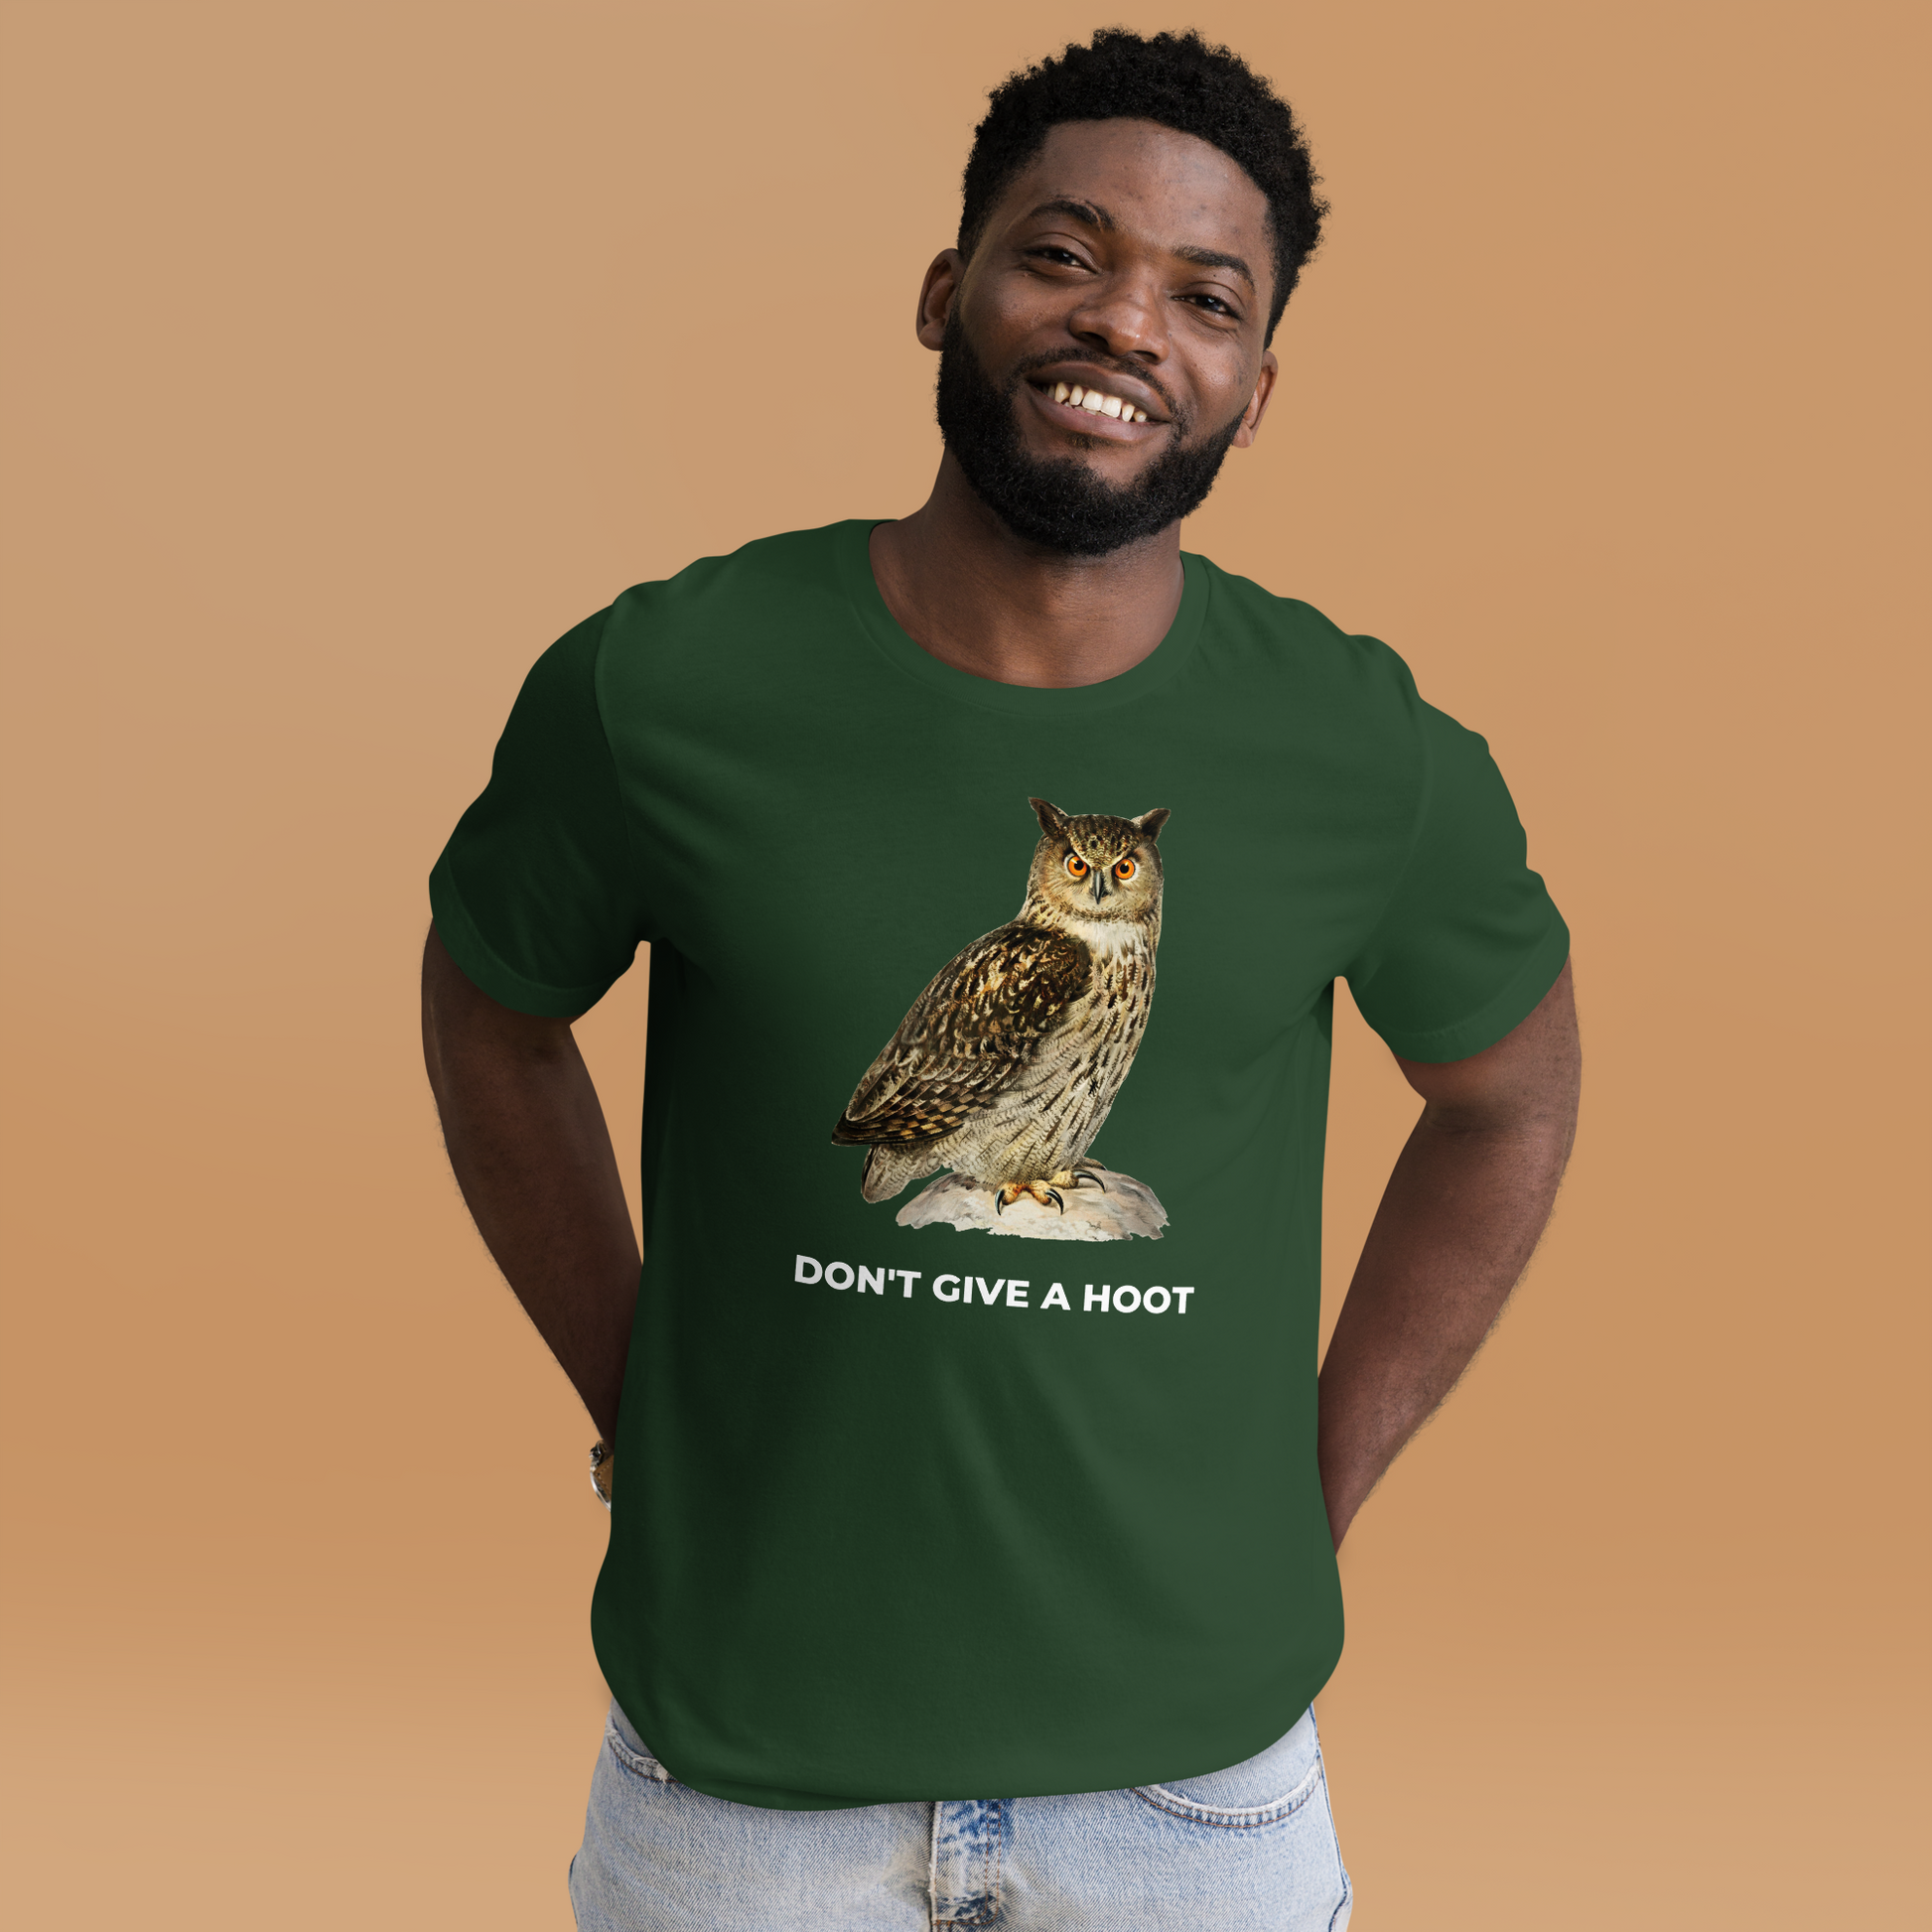 Smiling man wearing a Forest Green Premium Owl T-Shirt featuring a captivating Don't Give A Hoot graphic on the chest - Funny Graphic Owl Tees - Boozy Fox